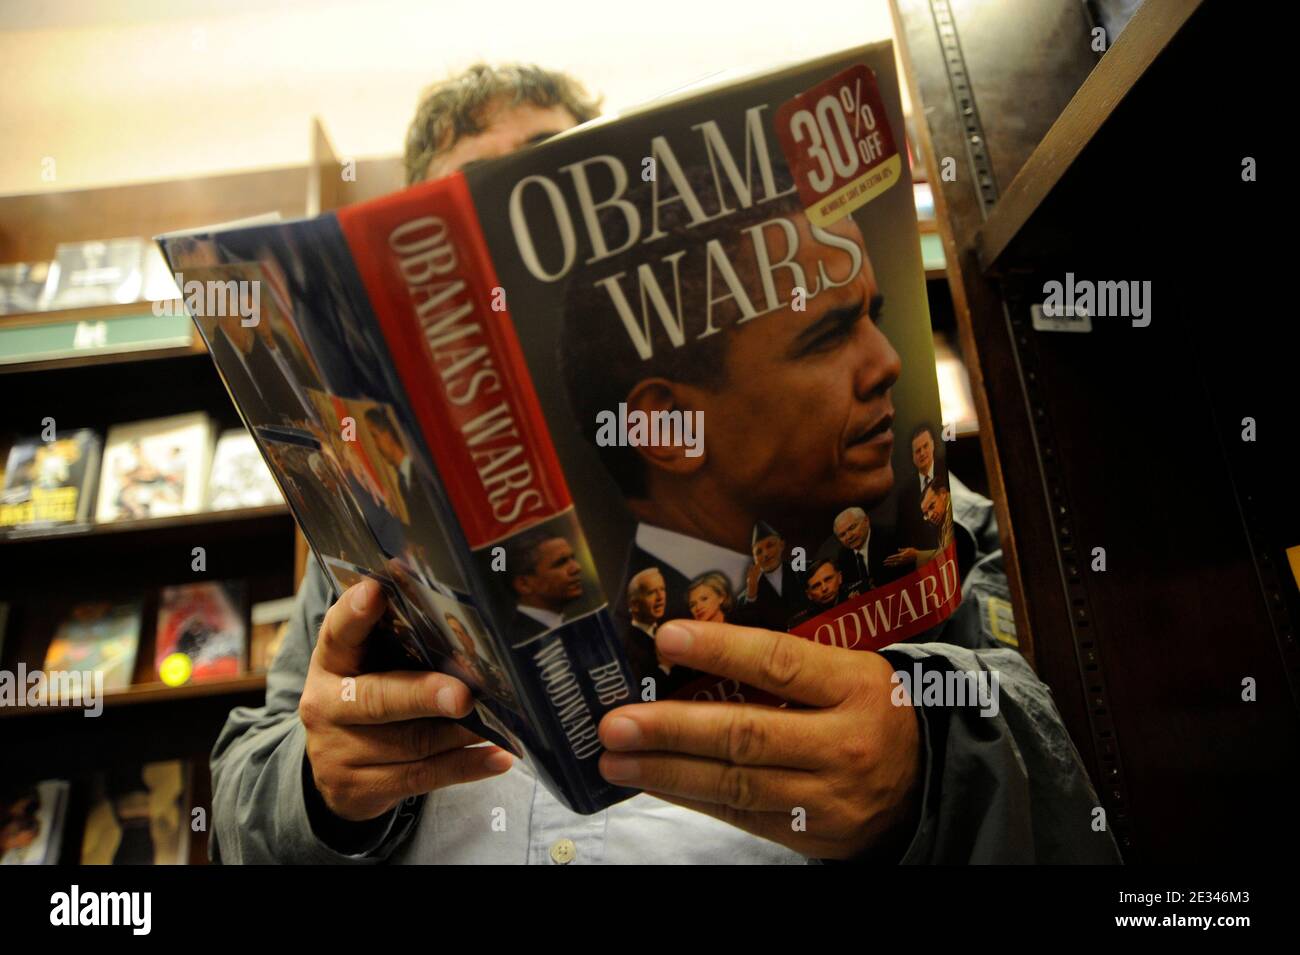 Journalist Bob Woodward's new book 'Obama's Wars' is seen in a bookstore September 27, 2010 in New York City.The book was released today and reportedly portrays controversy and division within the White House over Afghanistan war policy. Bob Woodward is well-known for his coverage of the Watergate scandal. Photo by Mehdi Taamallah/ABACAPRESS.COM (Pictured: Barack Obama) Stock Photo